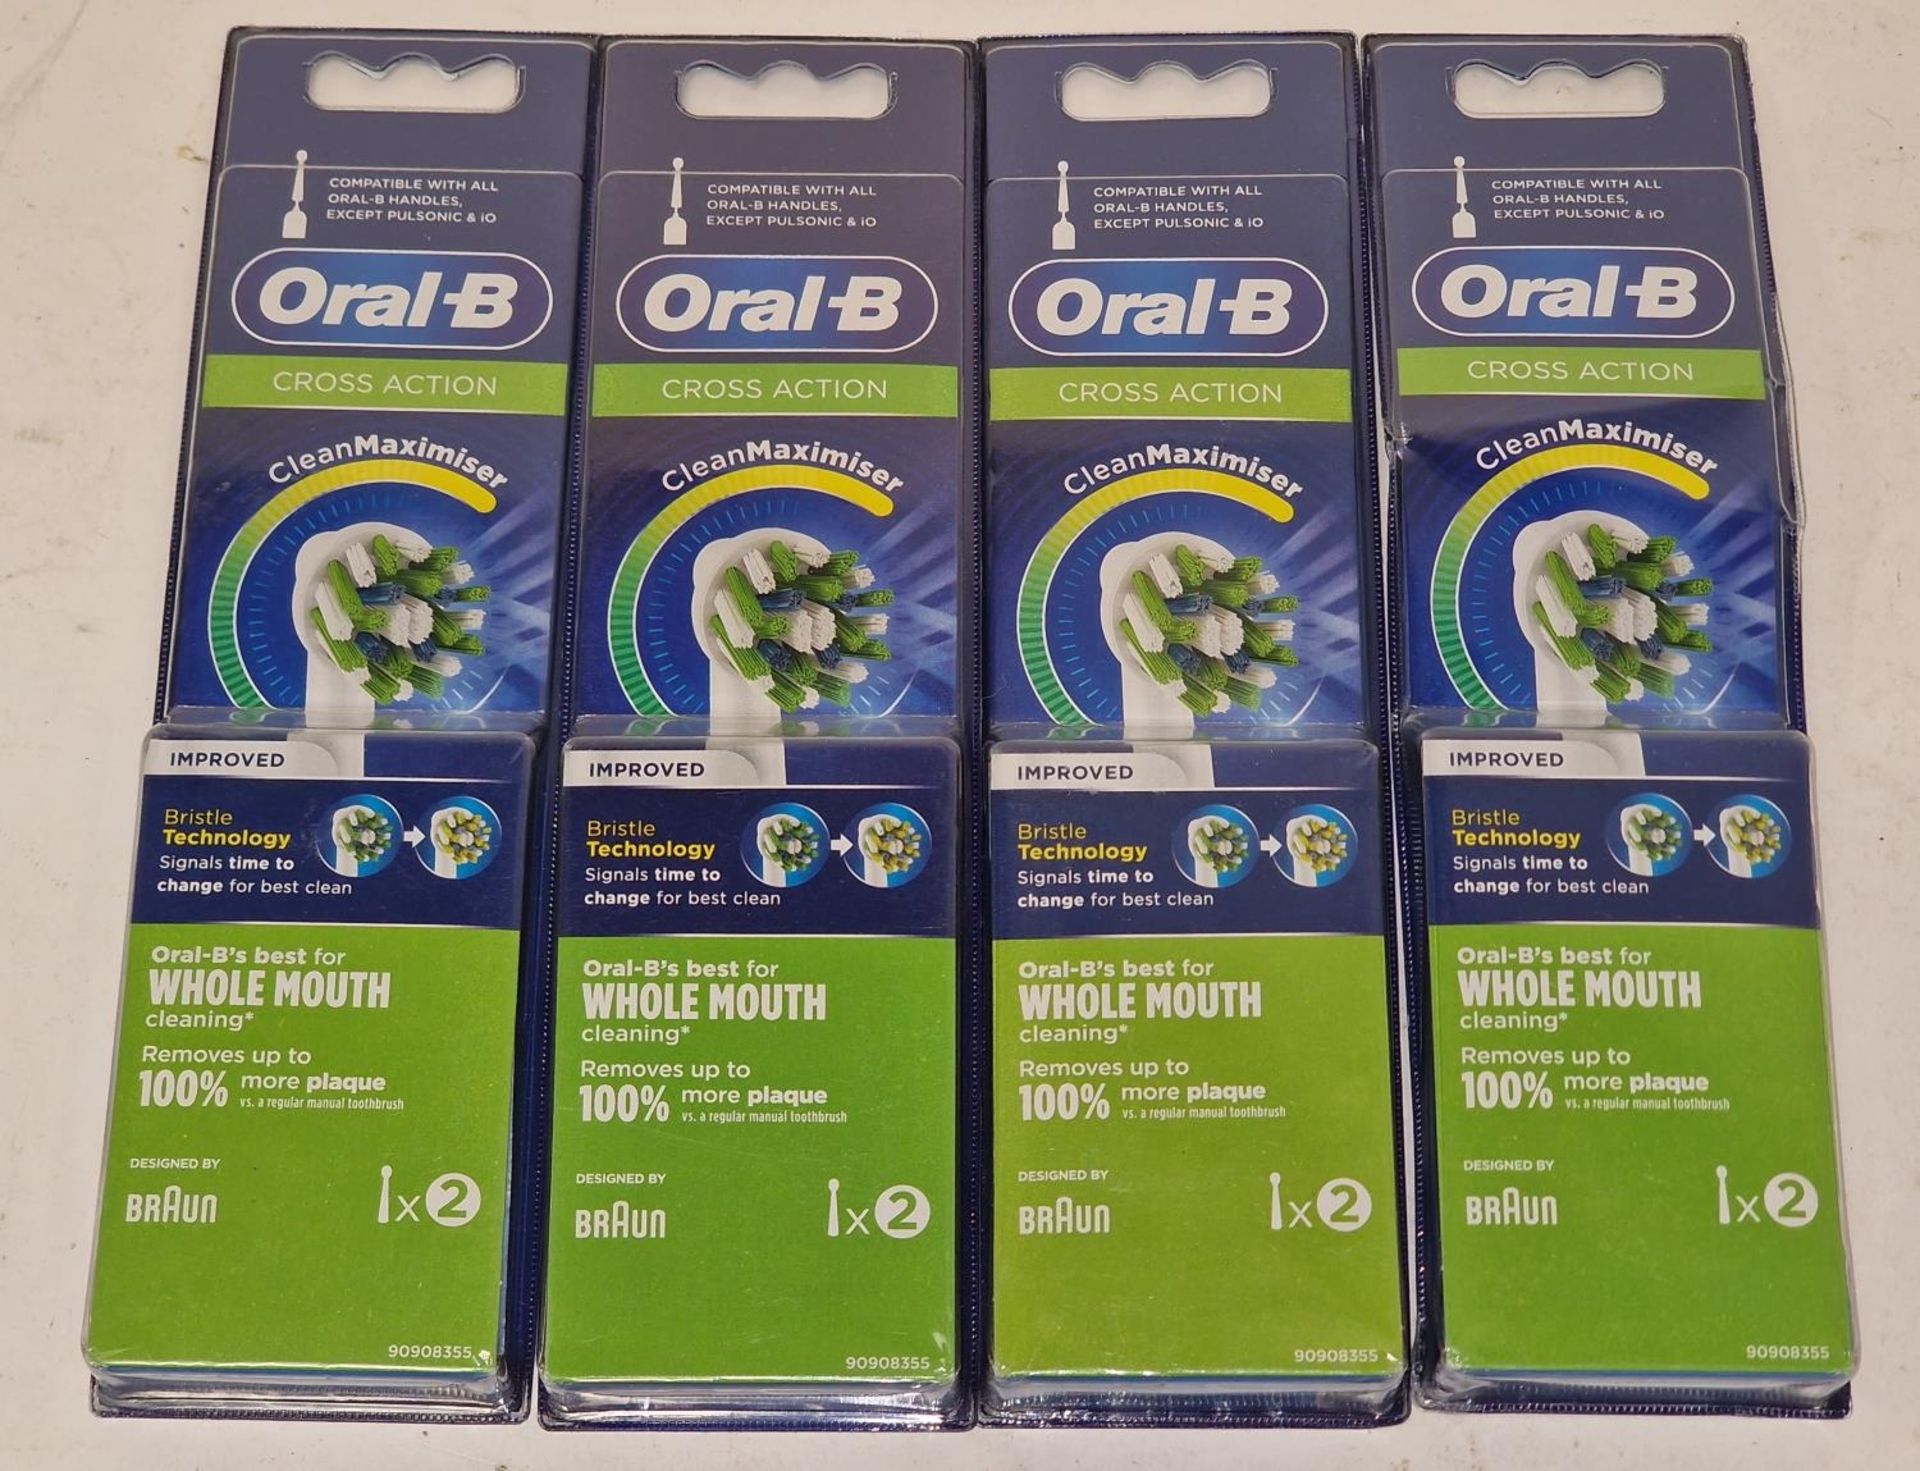 4 x packs of 2 Oral B Cross Action toothbrush heads (REF 42).